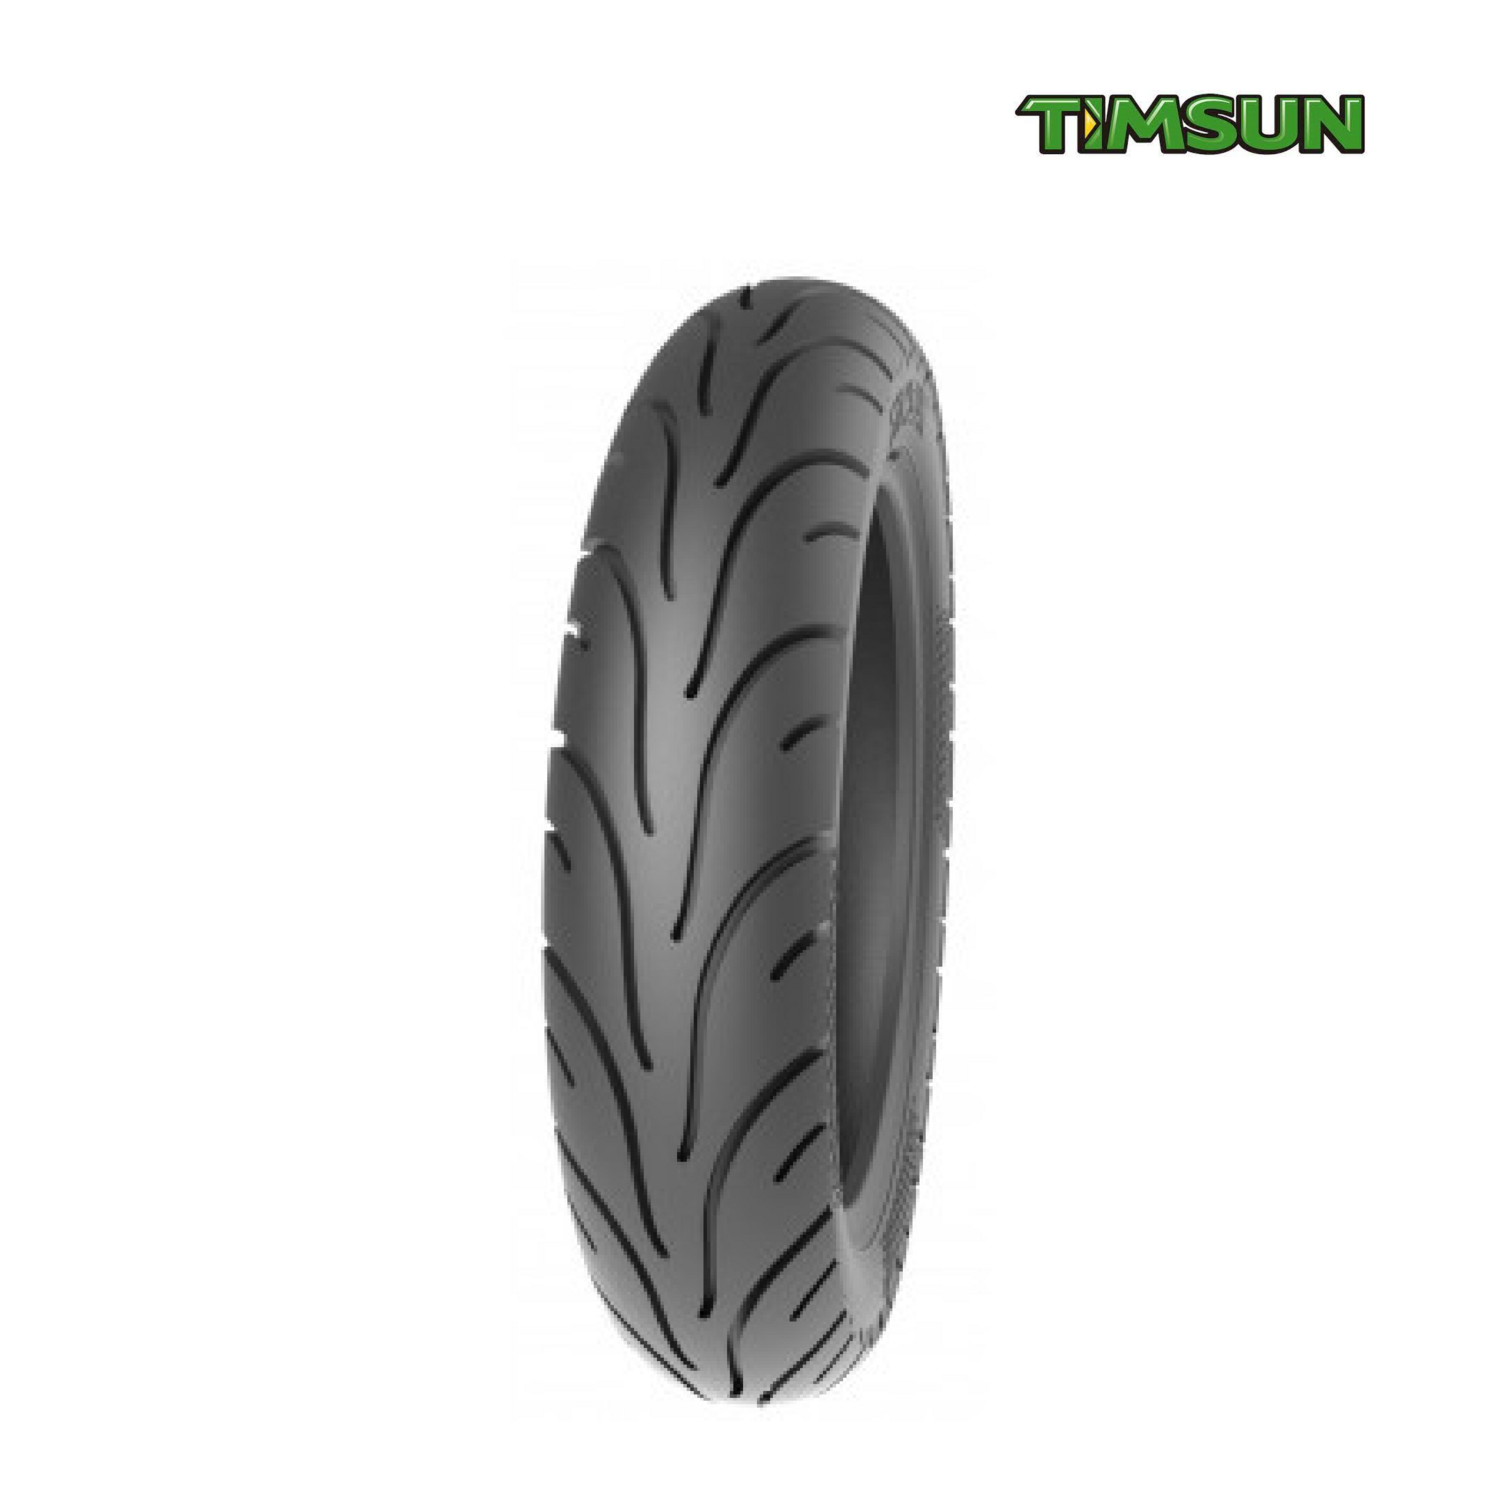 TIMSUN TS 653 90/100-10 Two Wheeler Scooter Tyre